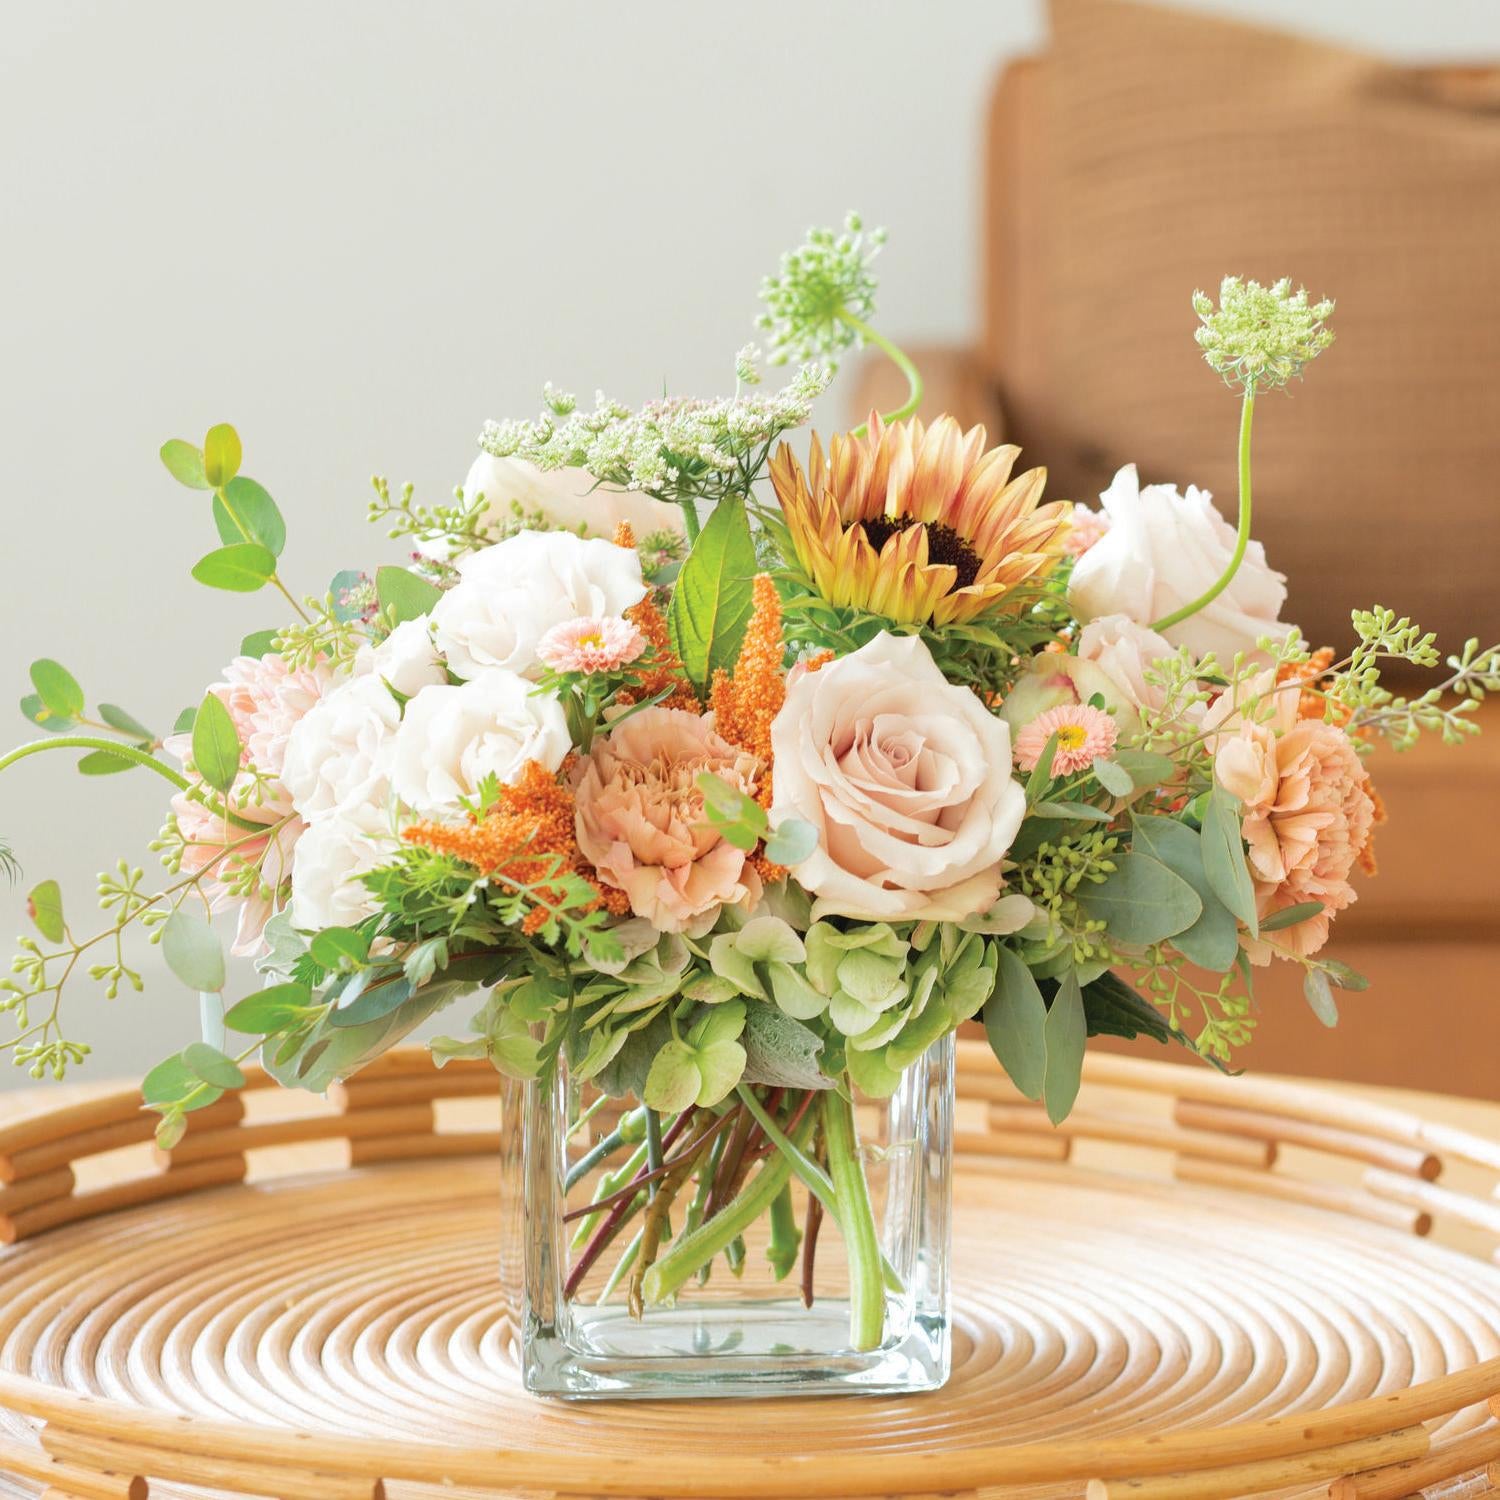 Fresh and elegant floral centerpiece with blush roses, peach carnations, green hydrangeas, and sunlit daisies in a clear glass vase, set upon a natural woven rattan table, creating a warm, inviting home decor atmosphere.